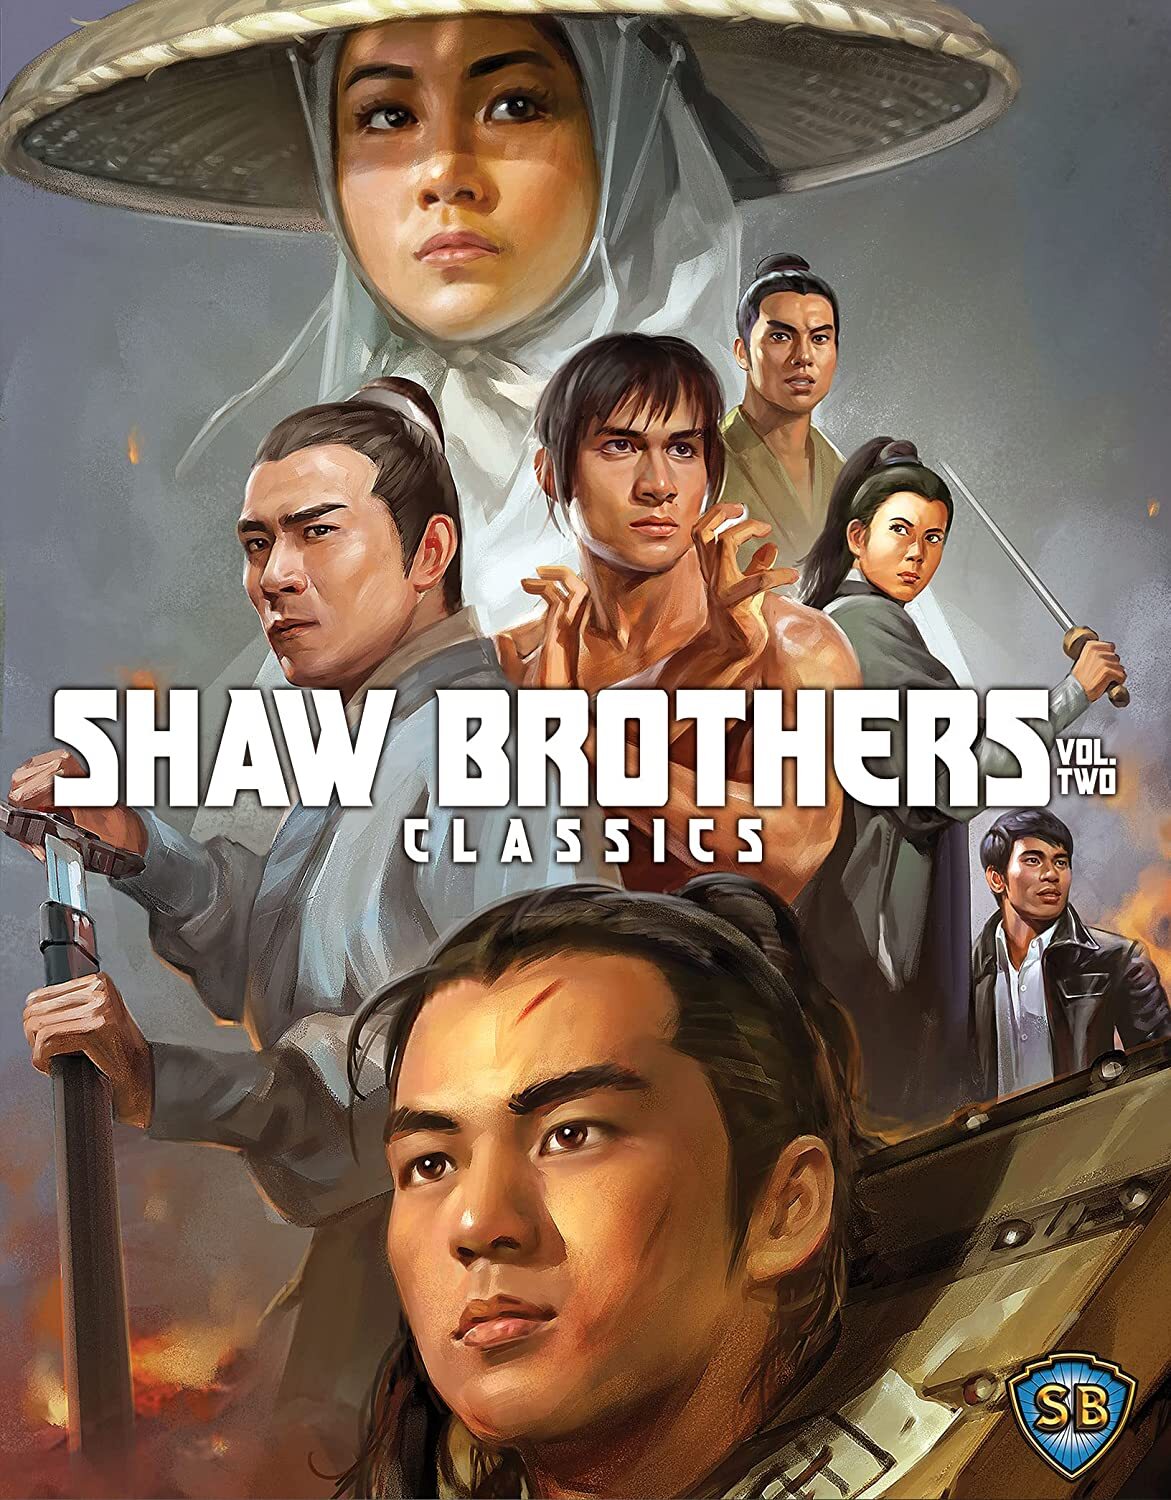 SHAW BROTHERS CLASSICS VOLUME 2 BLU-RAY [SCRATCH AND DENT]